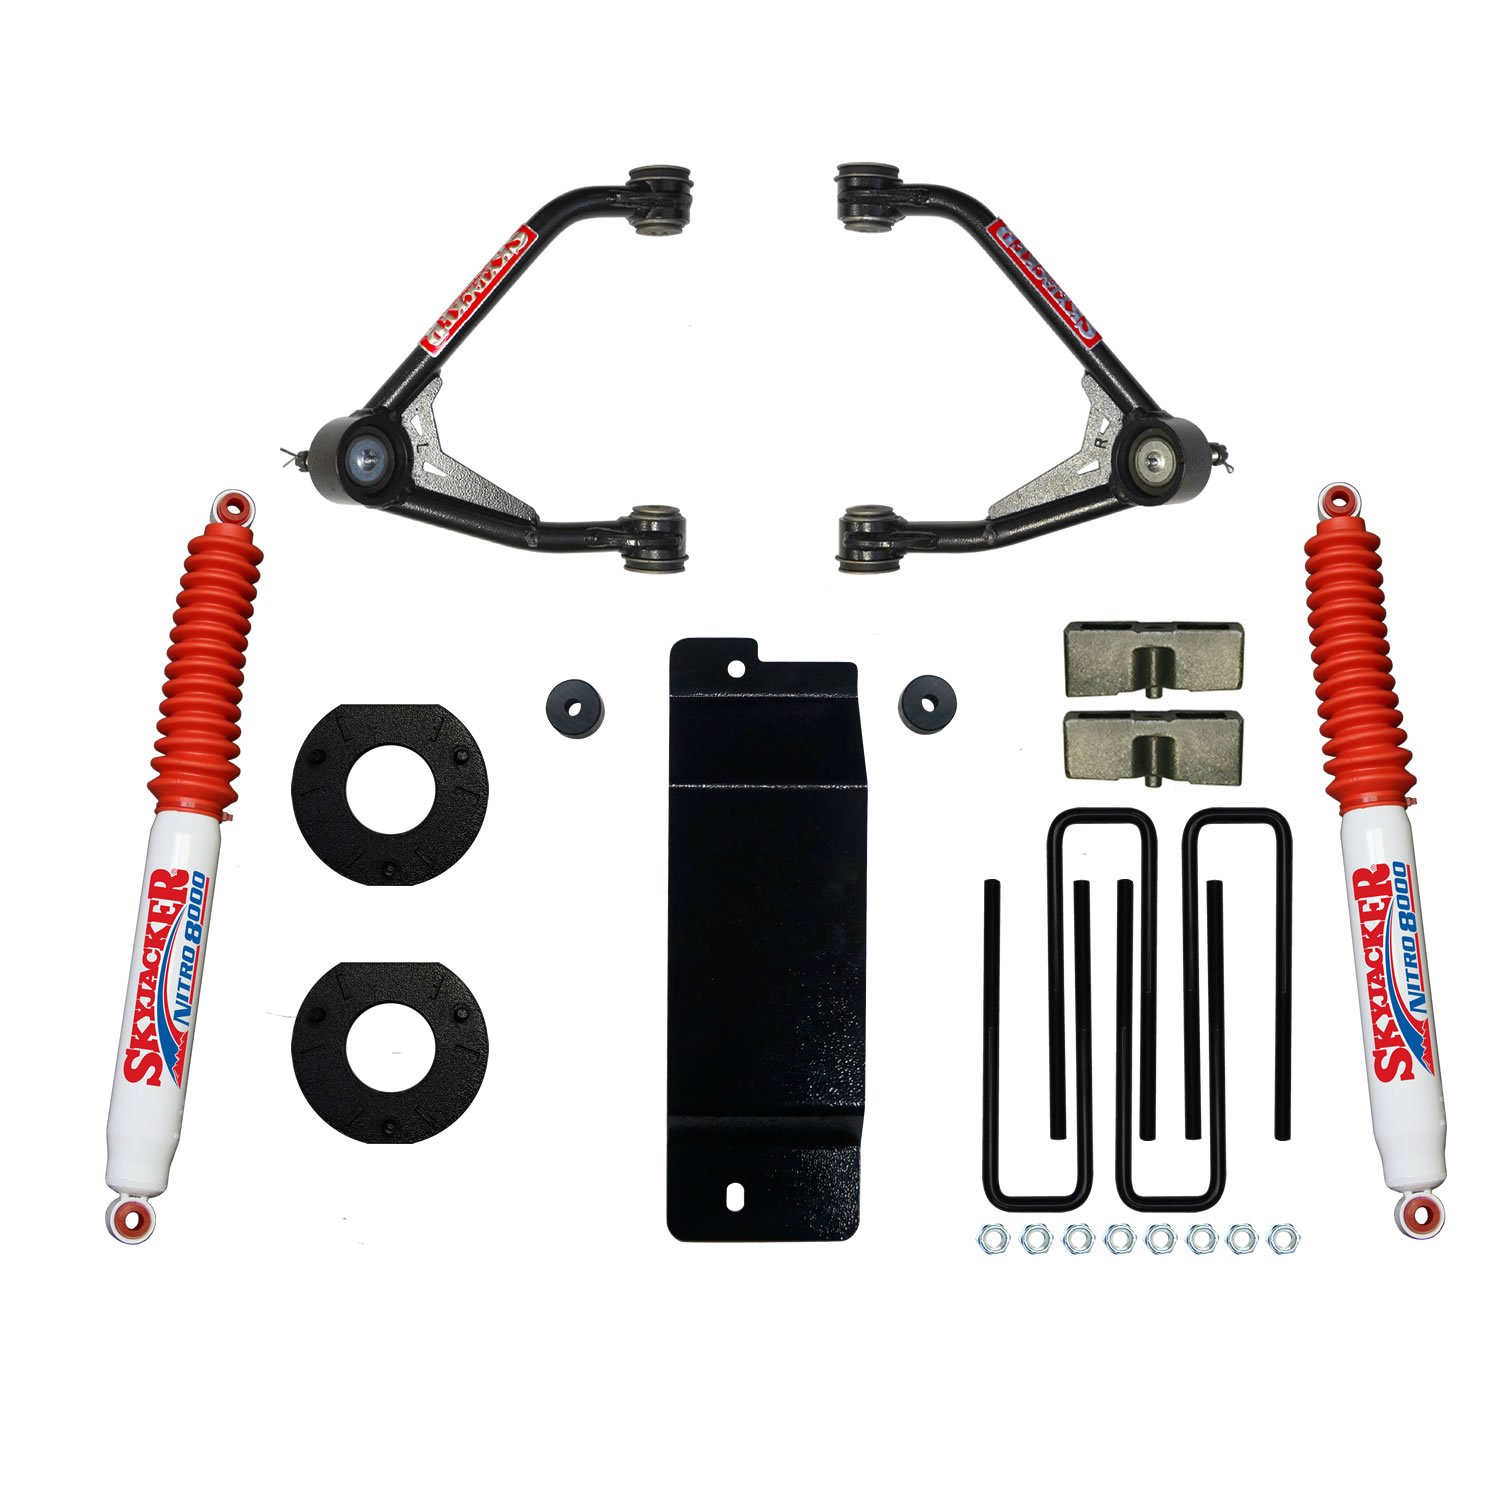 3.500-4.000 In. Upper Control Arm Lift Kit with Nitro8000 Rear Shocks for 2014-2016 GM 1500 4WD